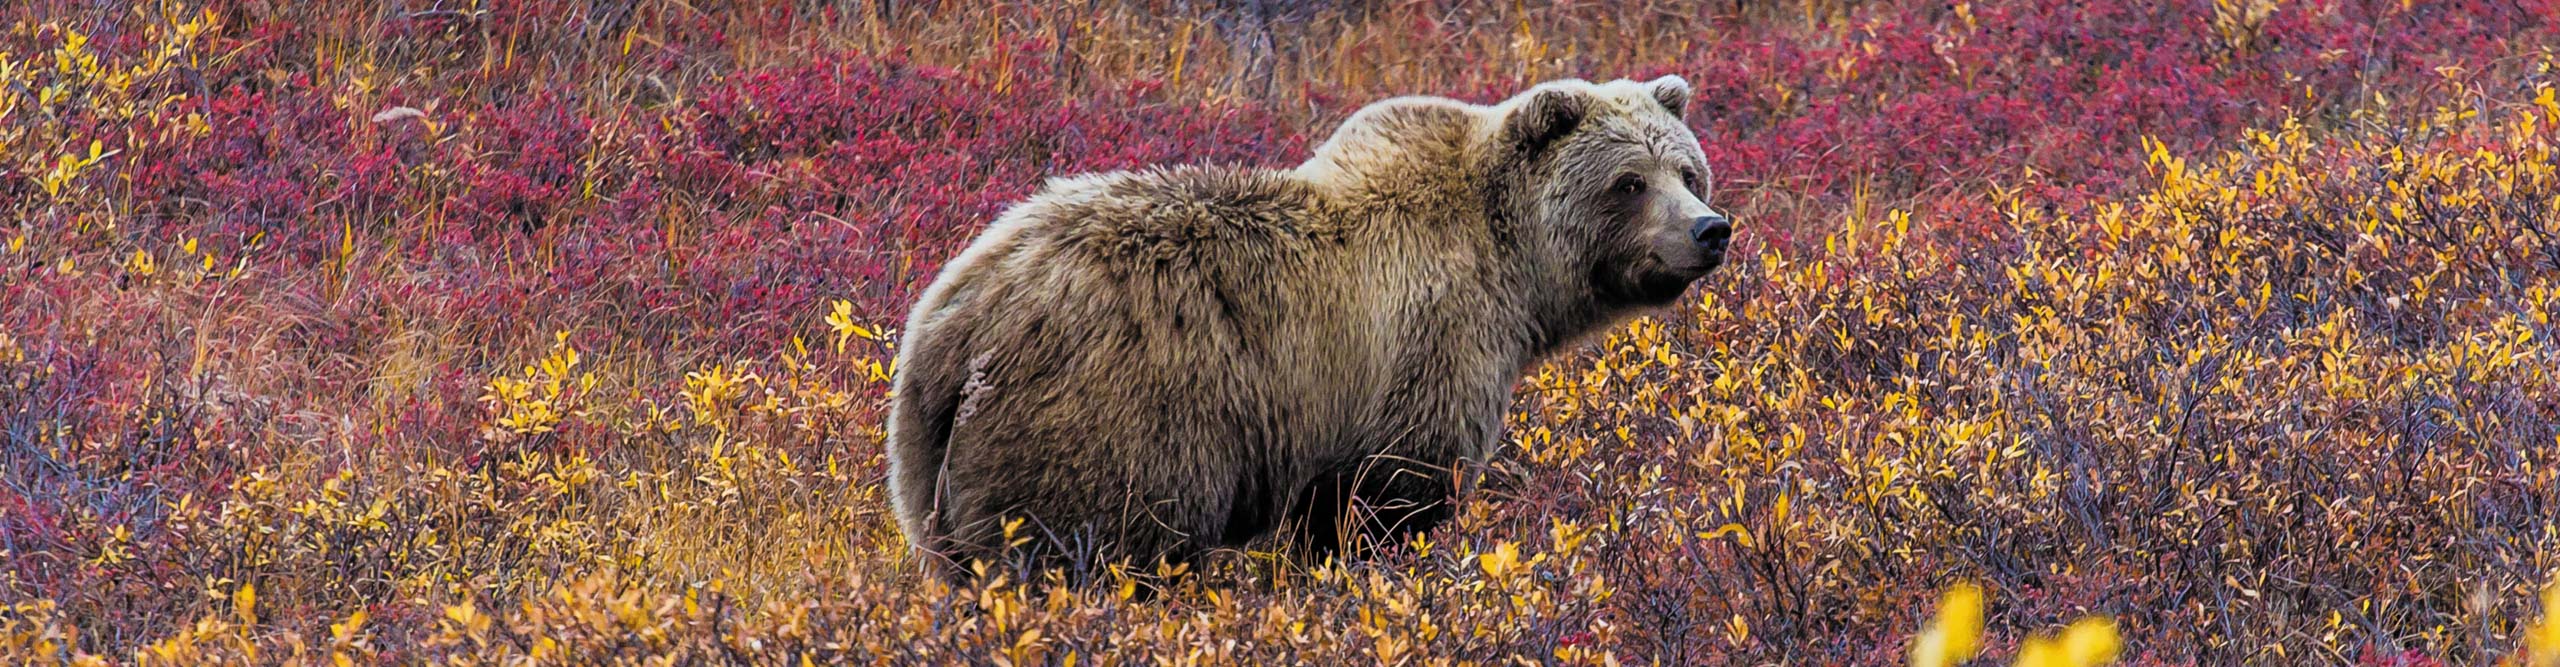 Grizzly bear walking through red and yellow foliage in Denali National Park, Alaska, USA